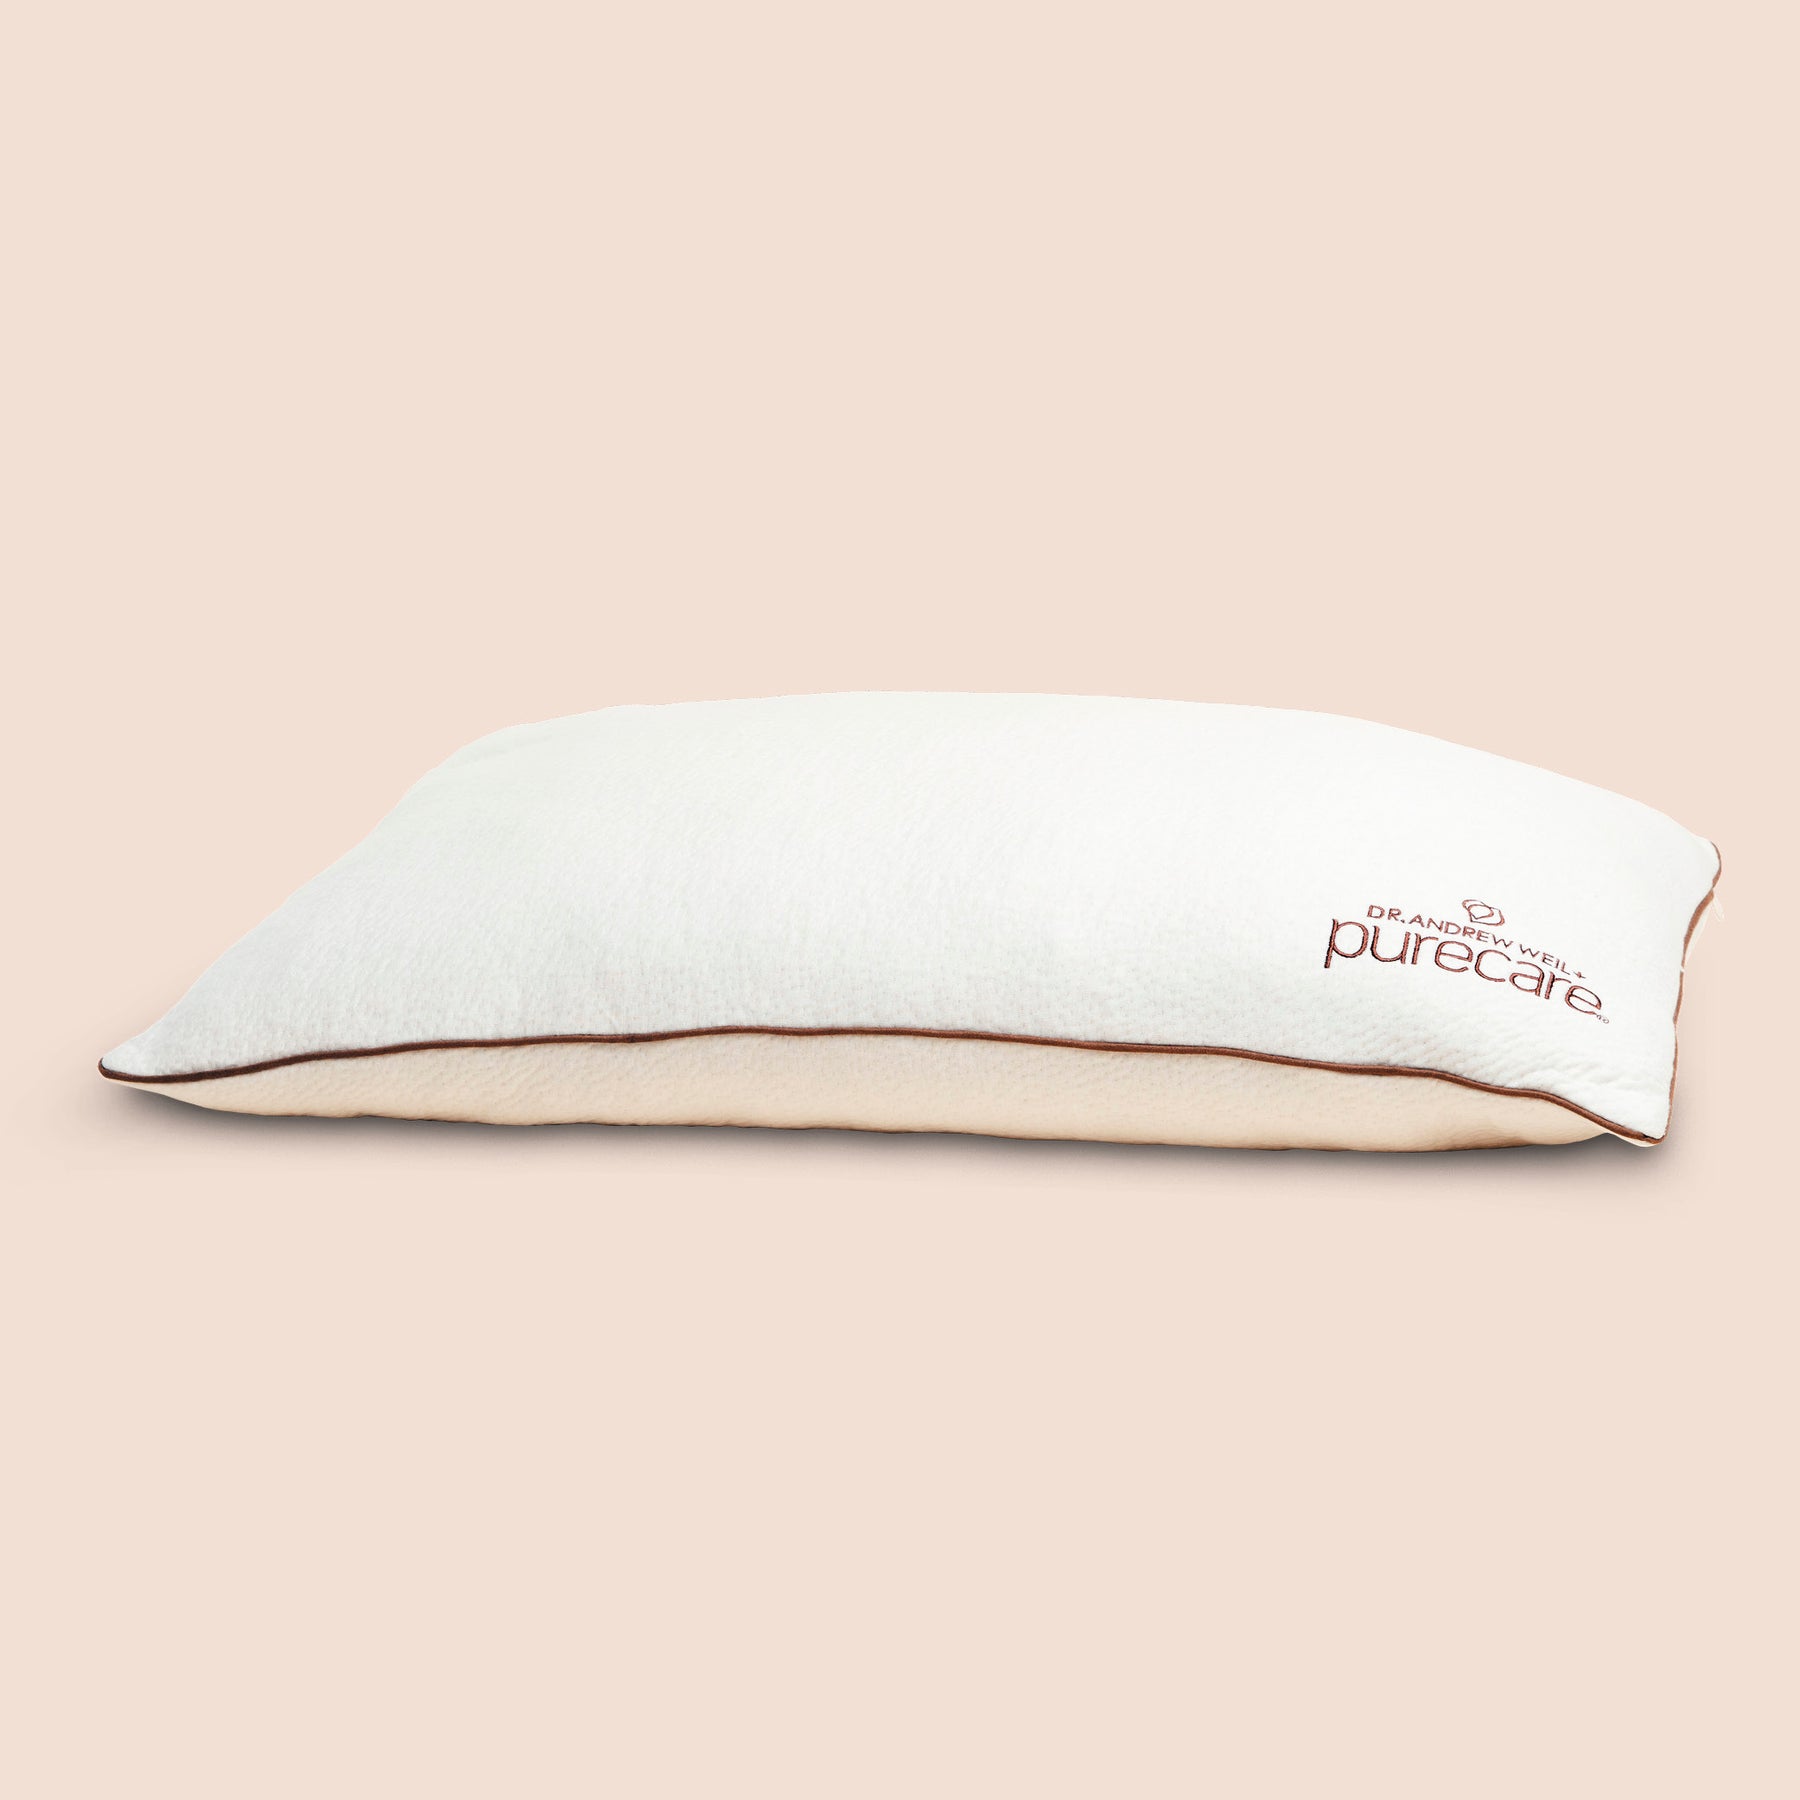 Image of Perfect Kapok Pillow on light pink background with Dr. Andrew Weil + Purecare logo in bottom right corner of pillow